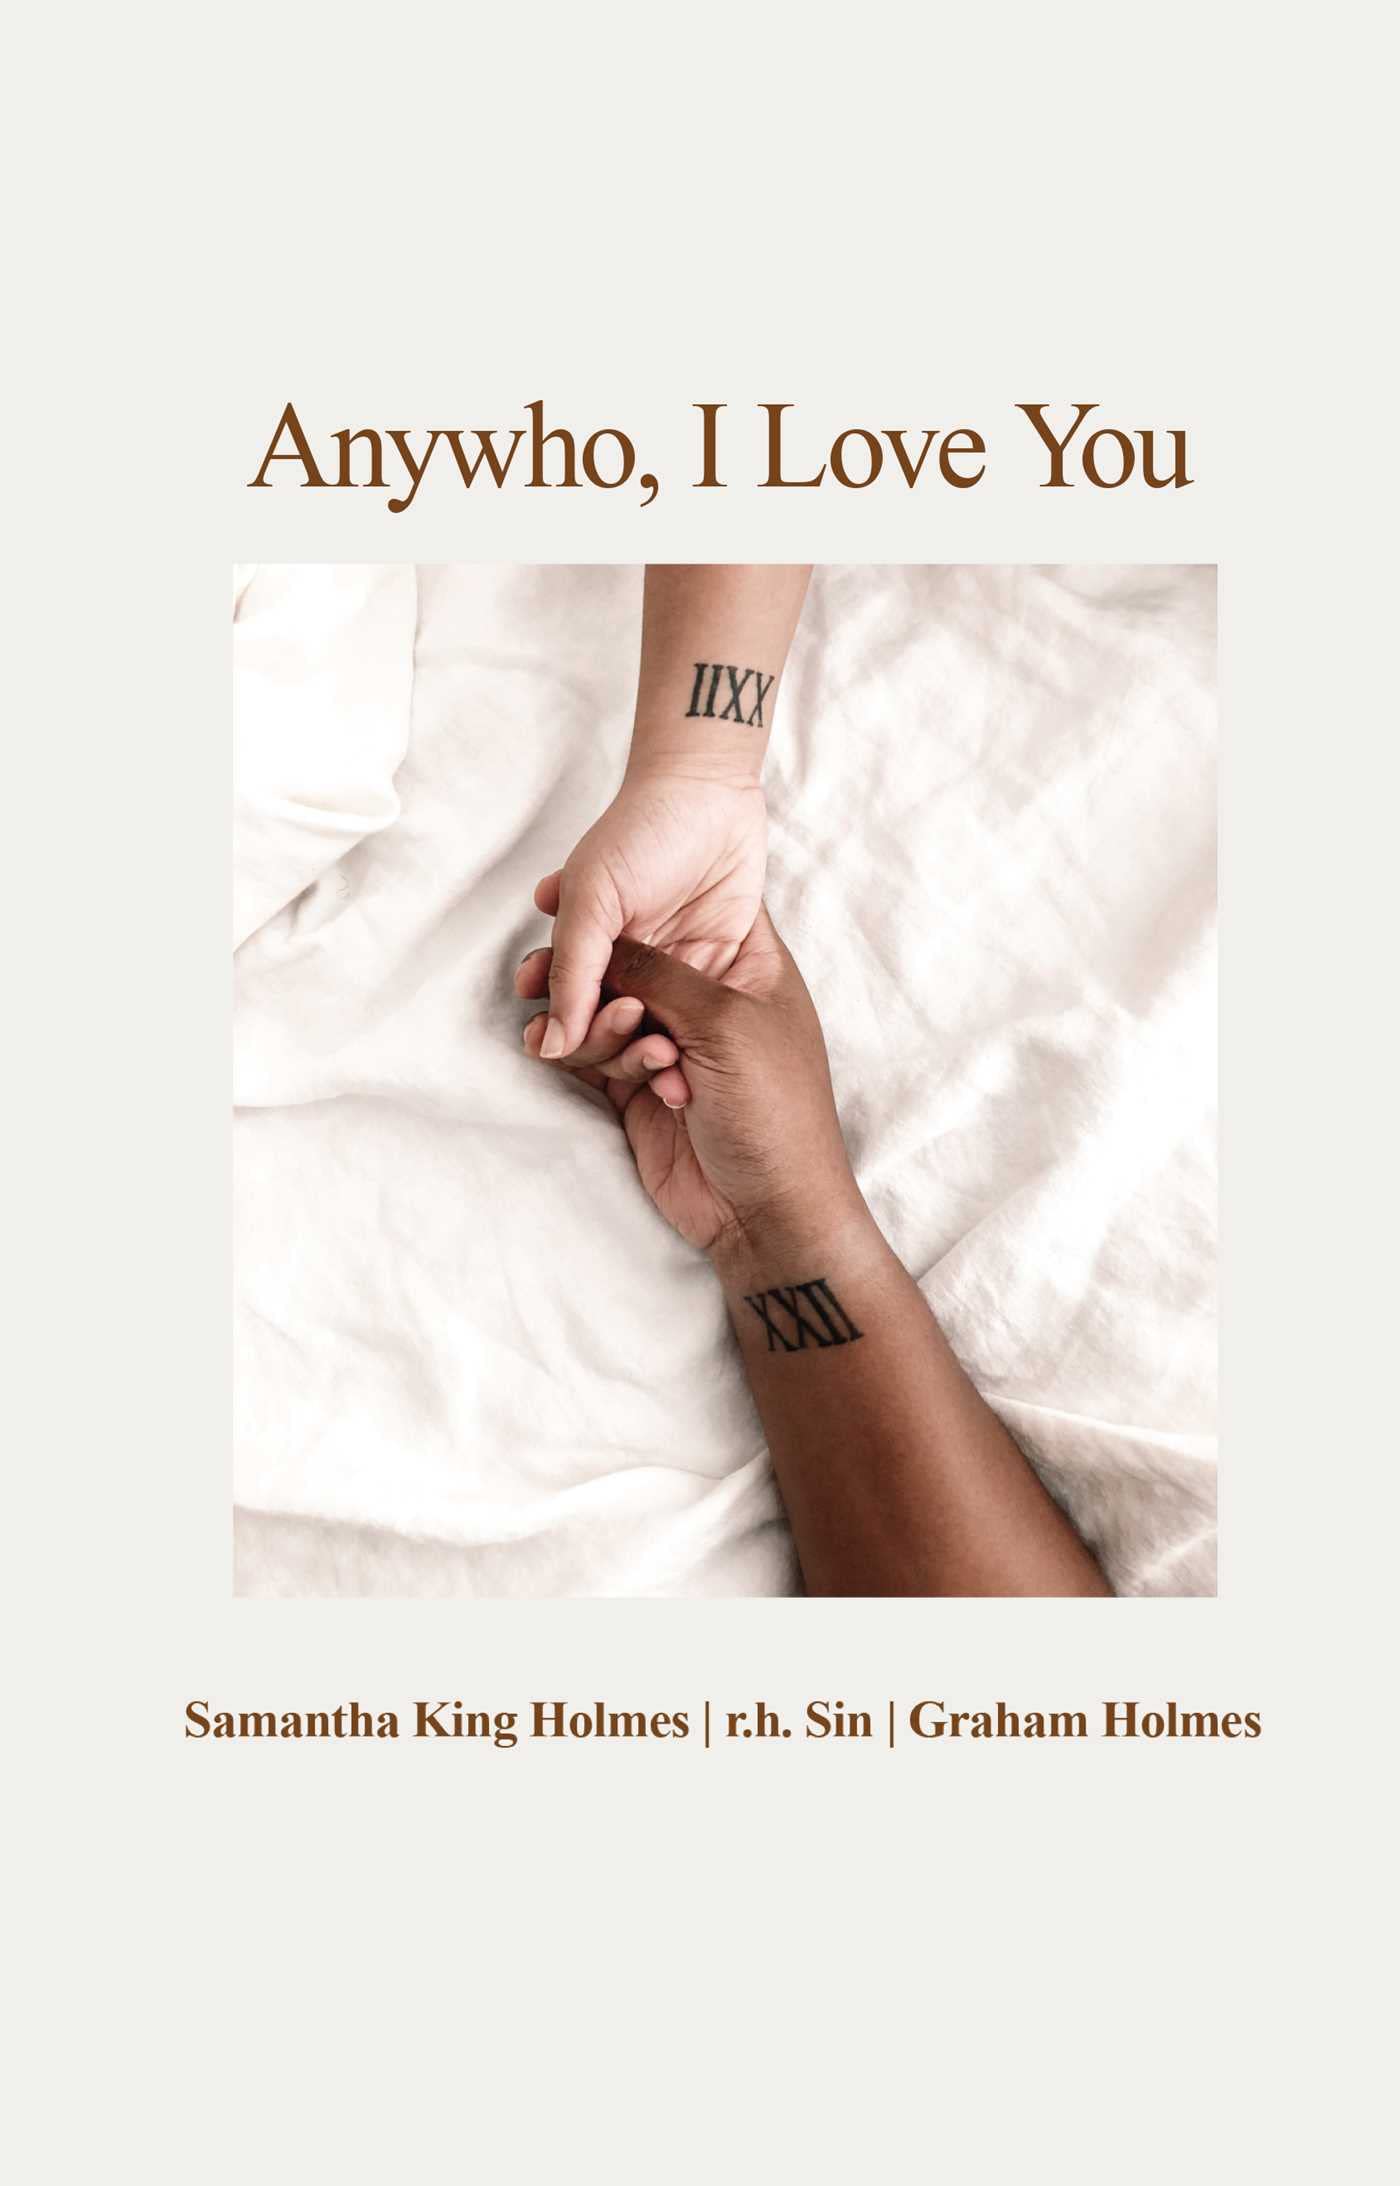 Bestselling Poet Samantha King Holmes and New York Times Bestselling Author r.h. Sin Release "Anywho, I Love You," a Collection of Poetry, Prose, and Photography to Rave Reviews